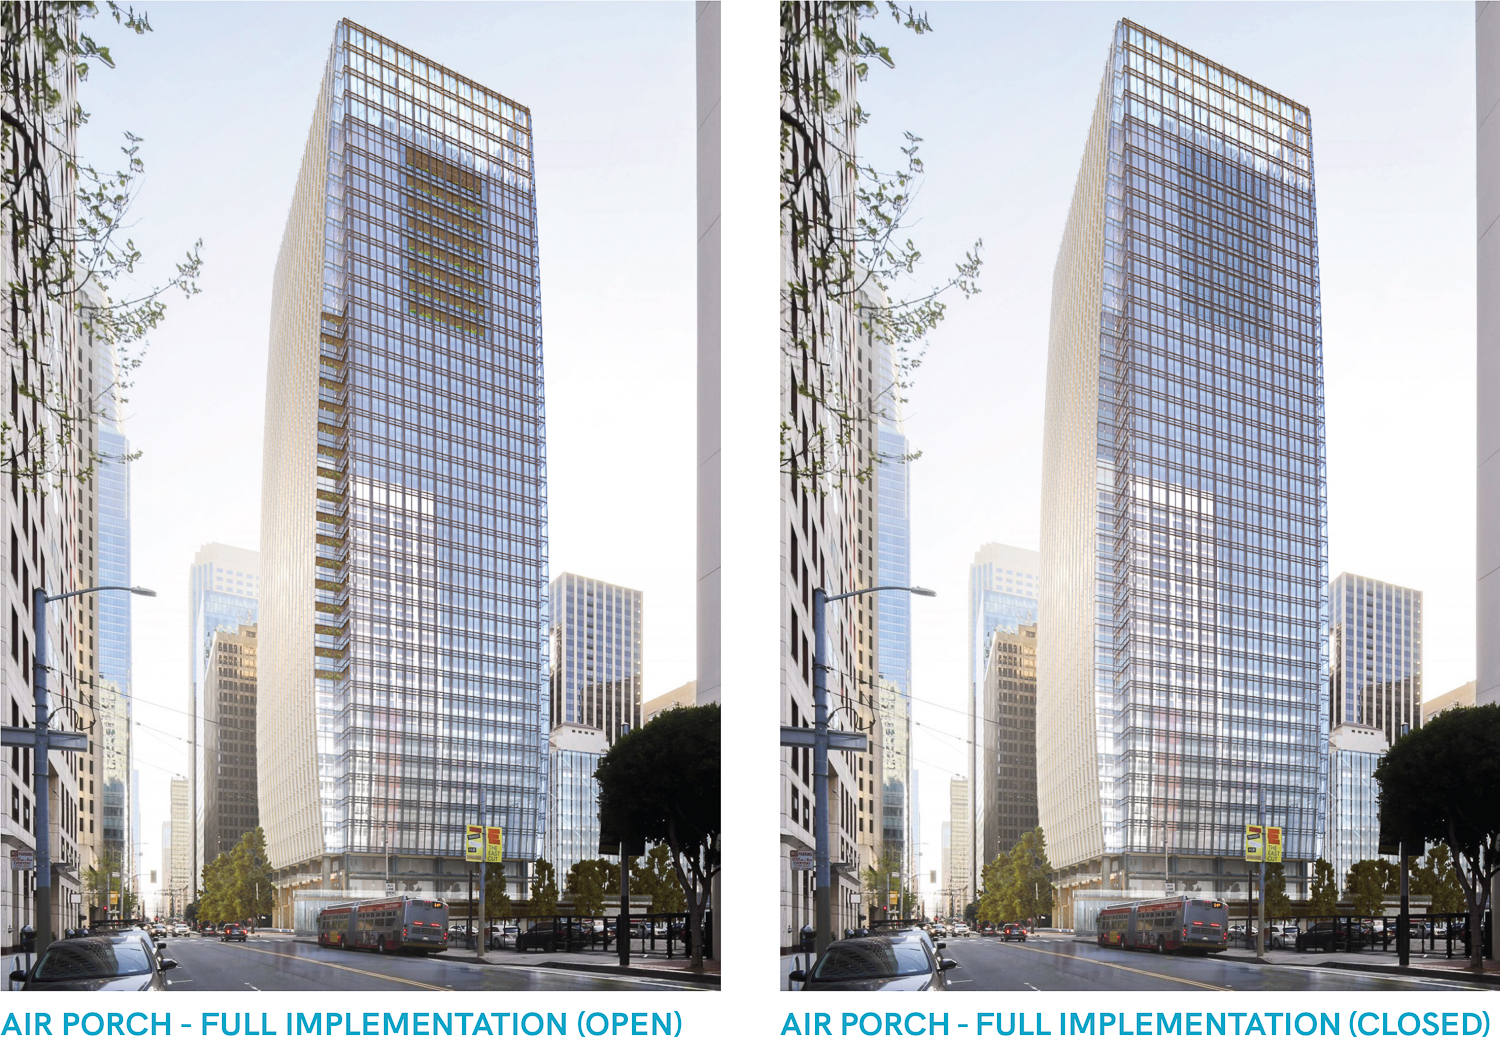 200 Mission Street air porches impact on the exterior, rendering by Pickard Chilton